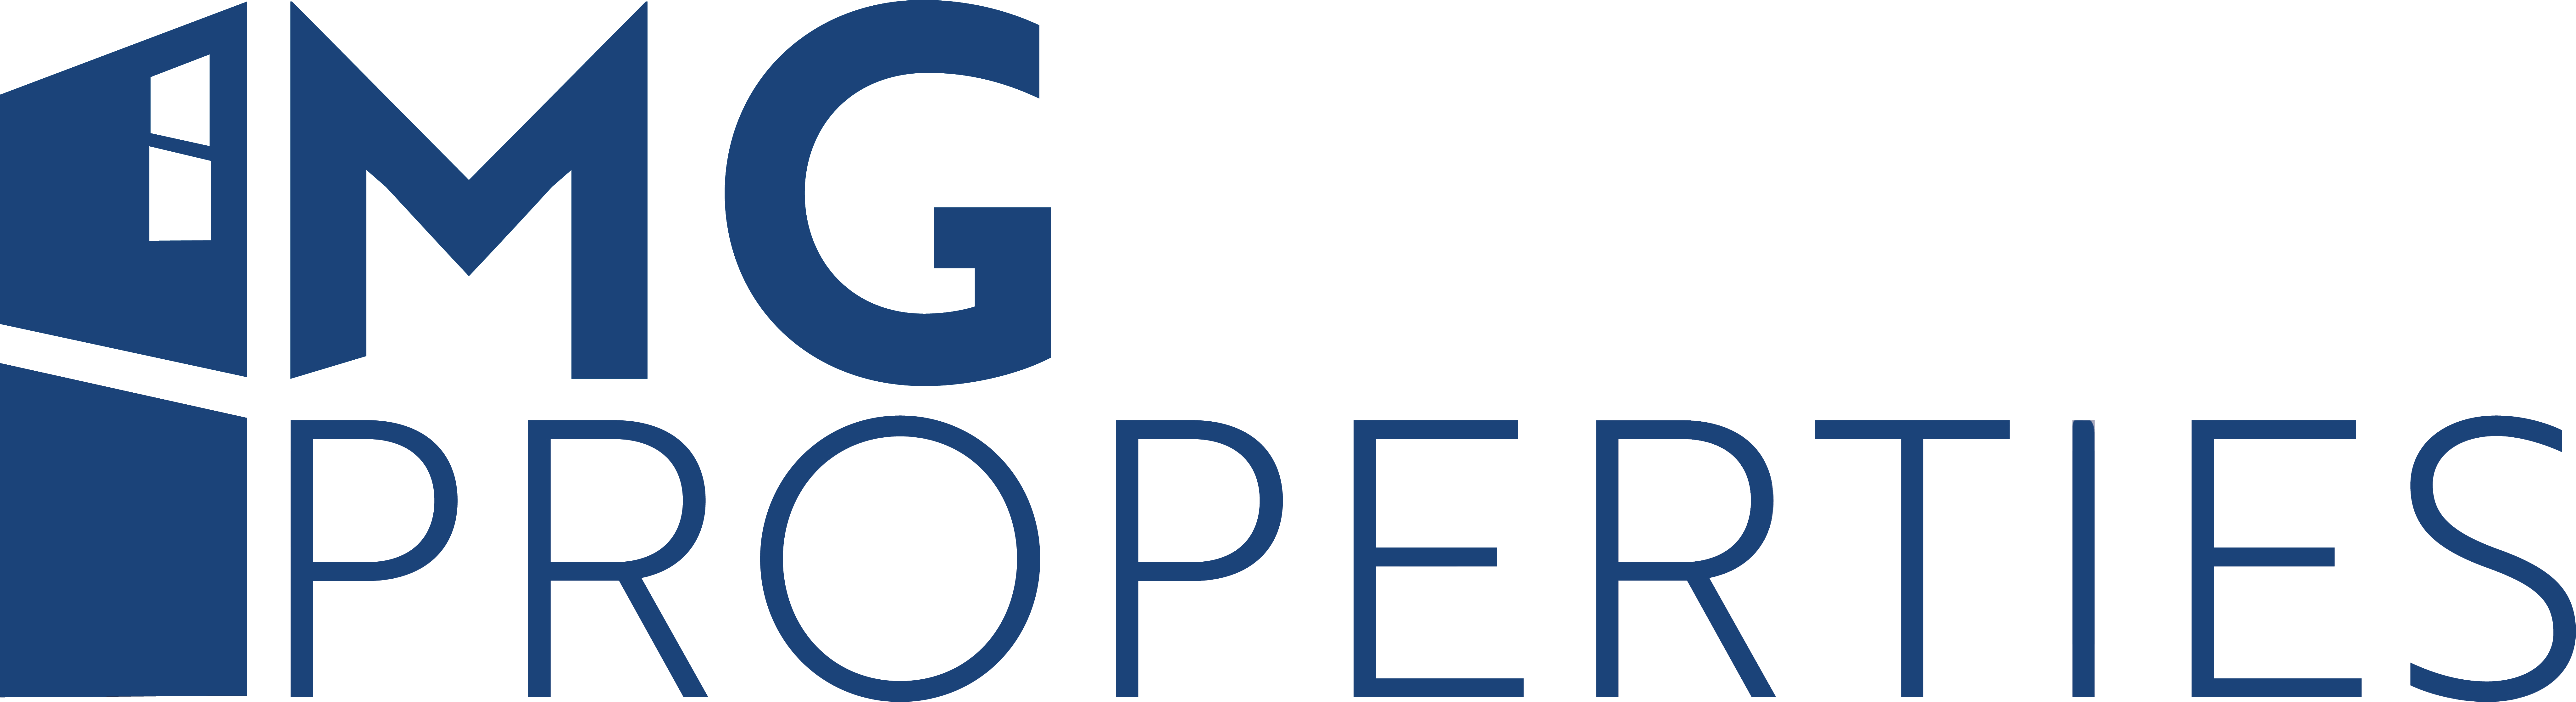 IMG Propereties Logo in a navy blue color